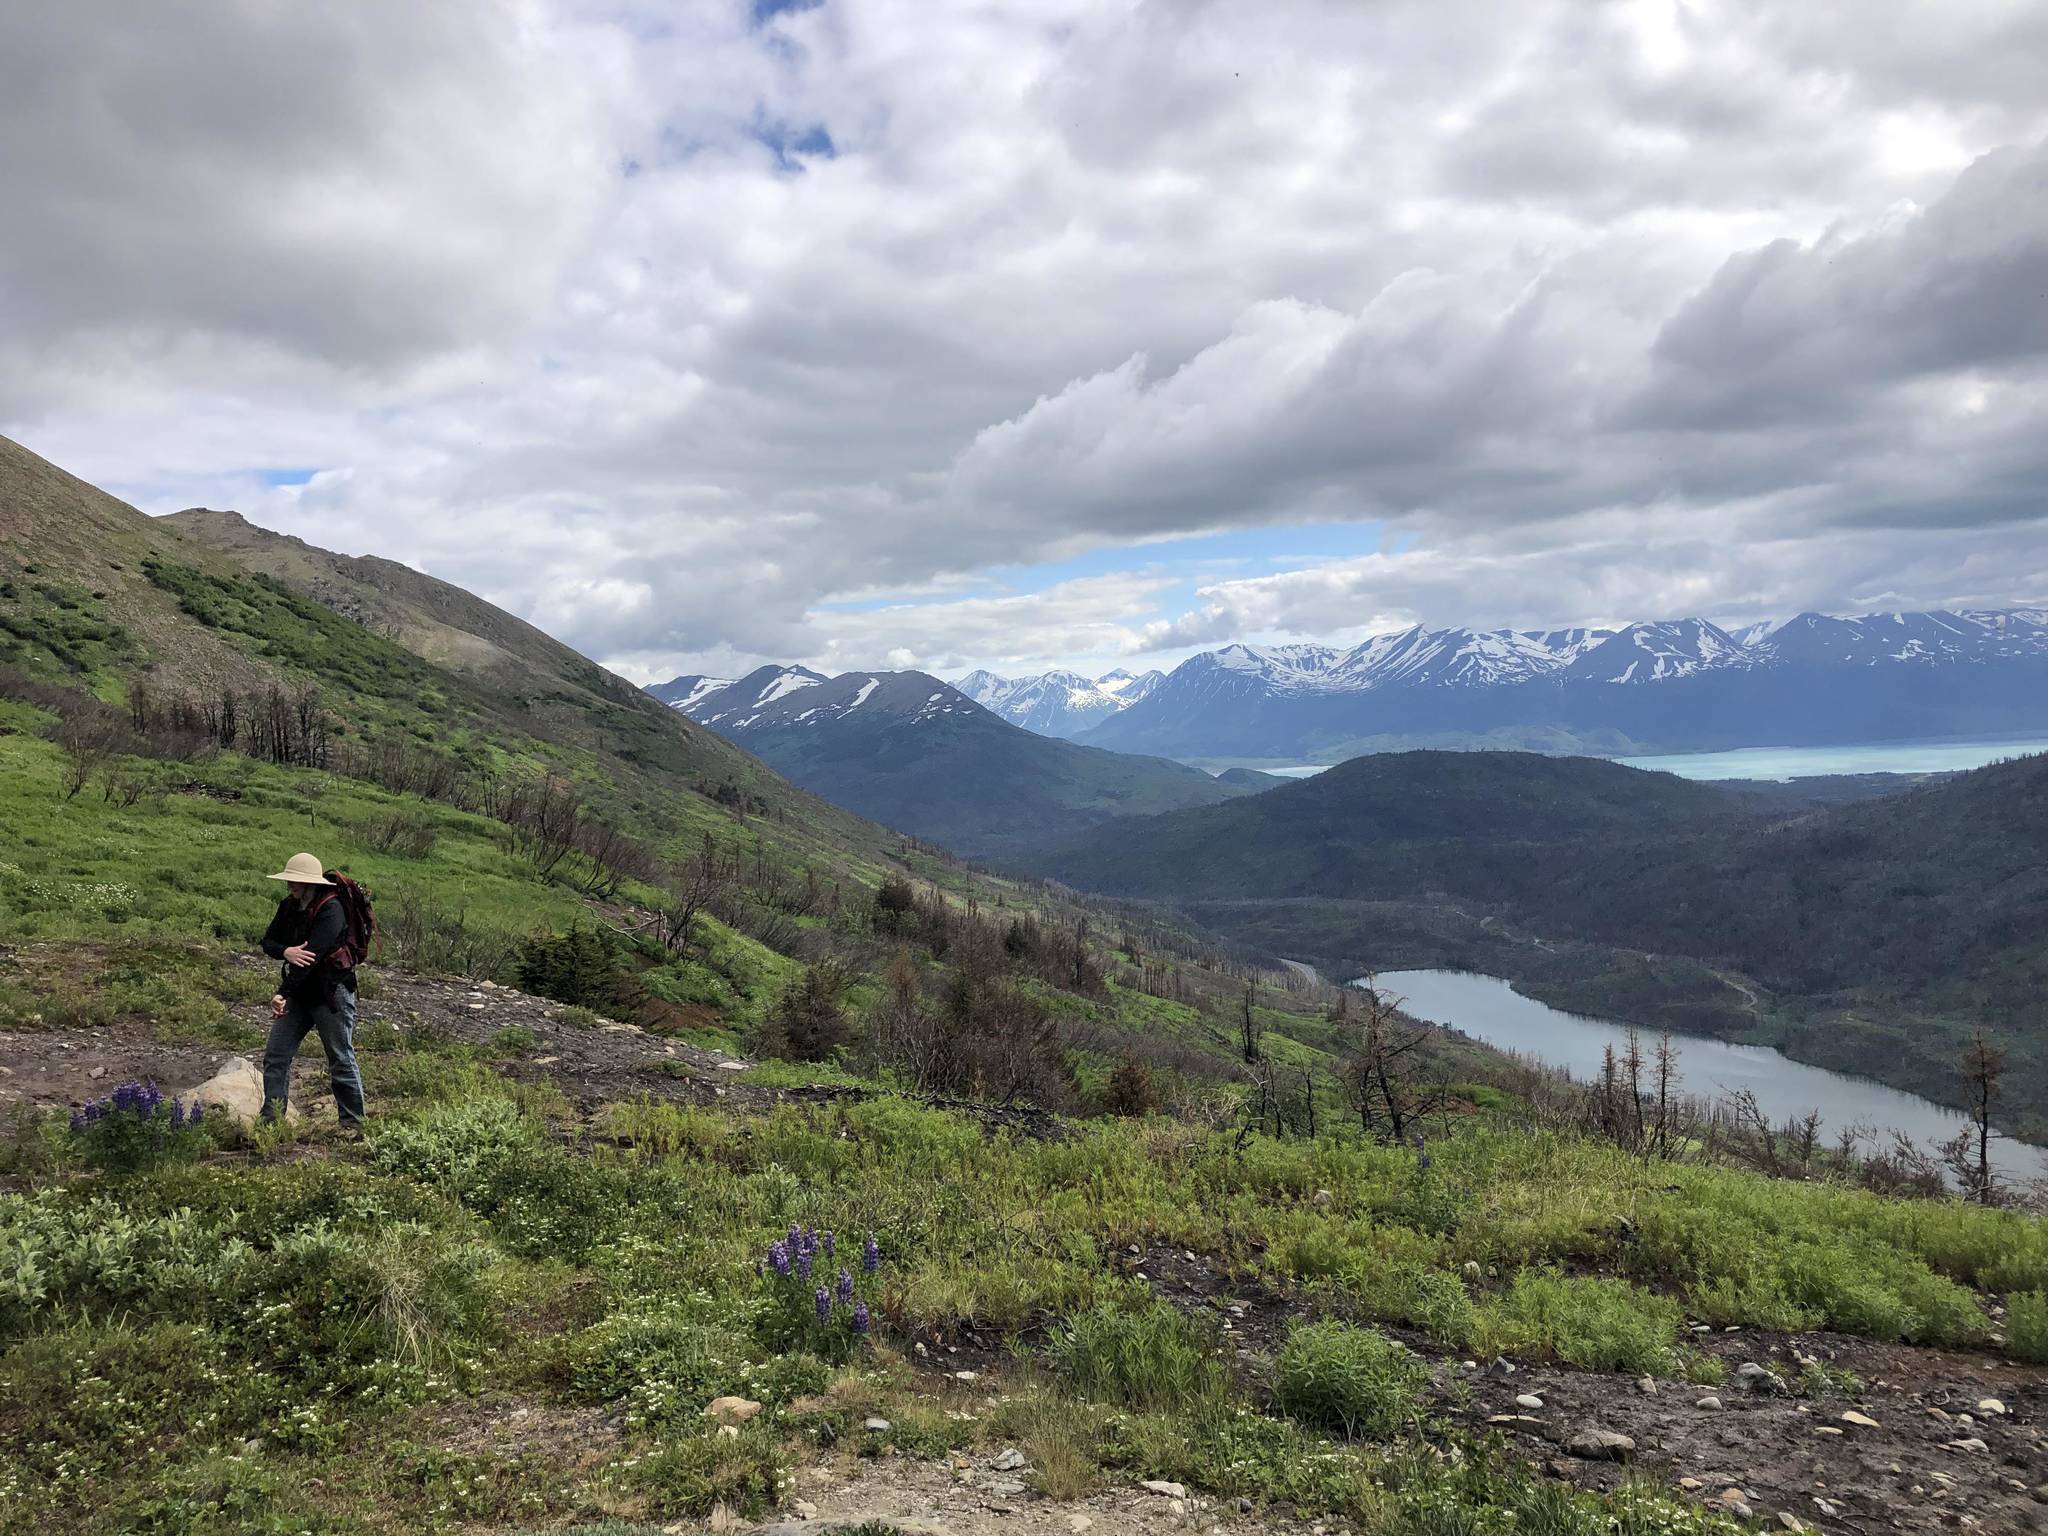 A hiker heads down Skyline Trail from the saddle near Cooper Landing, Alaska on June 27, 2021. (Camille Botello / Peninsula Clarion)